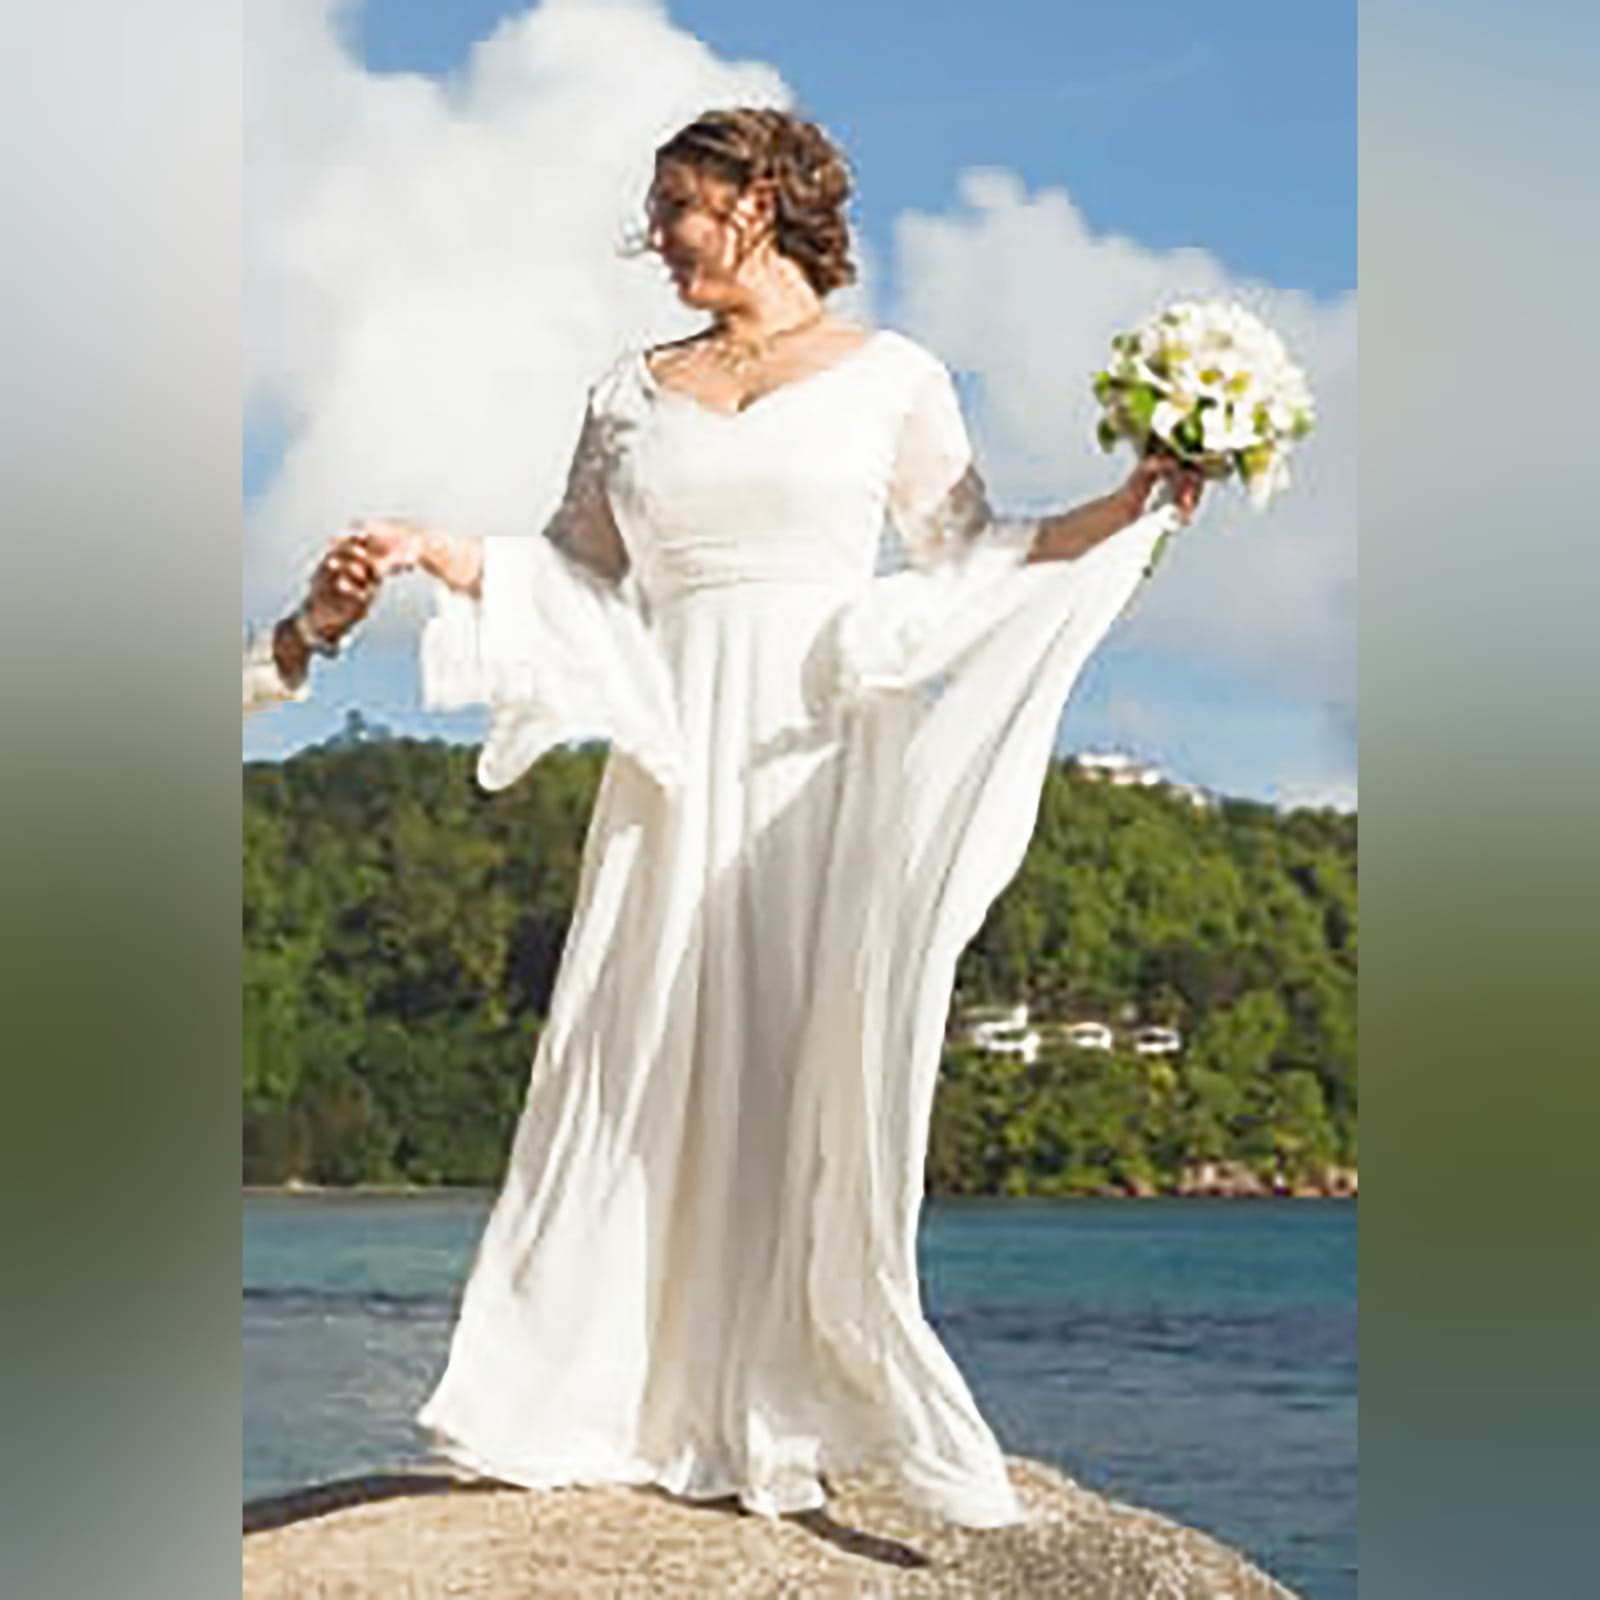 White flowy lace bodice wedding dress 1 white flowy lace bodice wedding dress. With bell sleeve and train. Sleeve and belt detailed with pearls. Stunnning wedding dress awesome for a beach wedding.